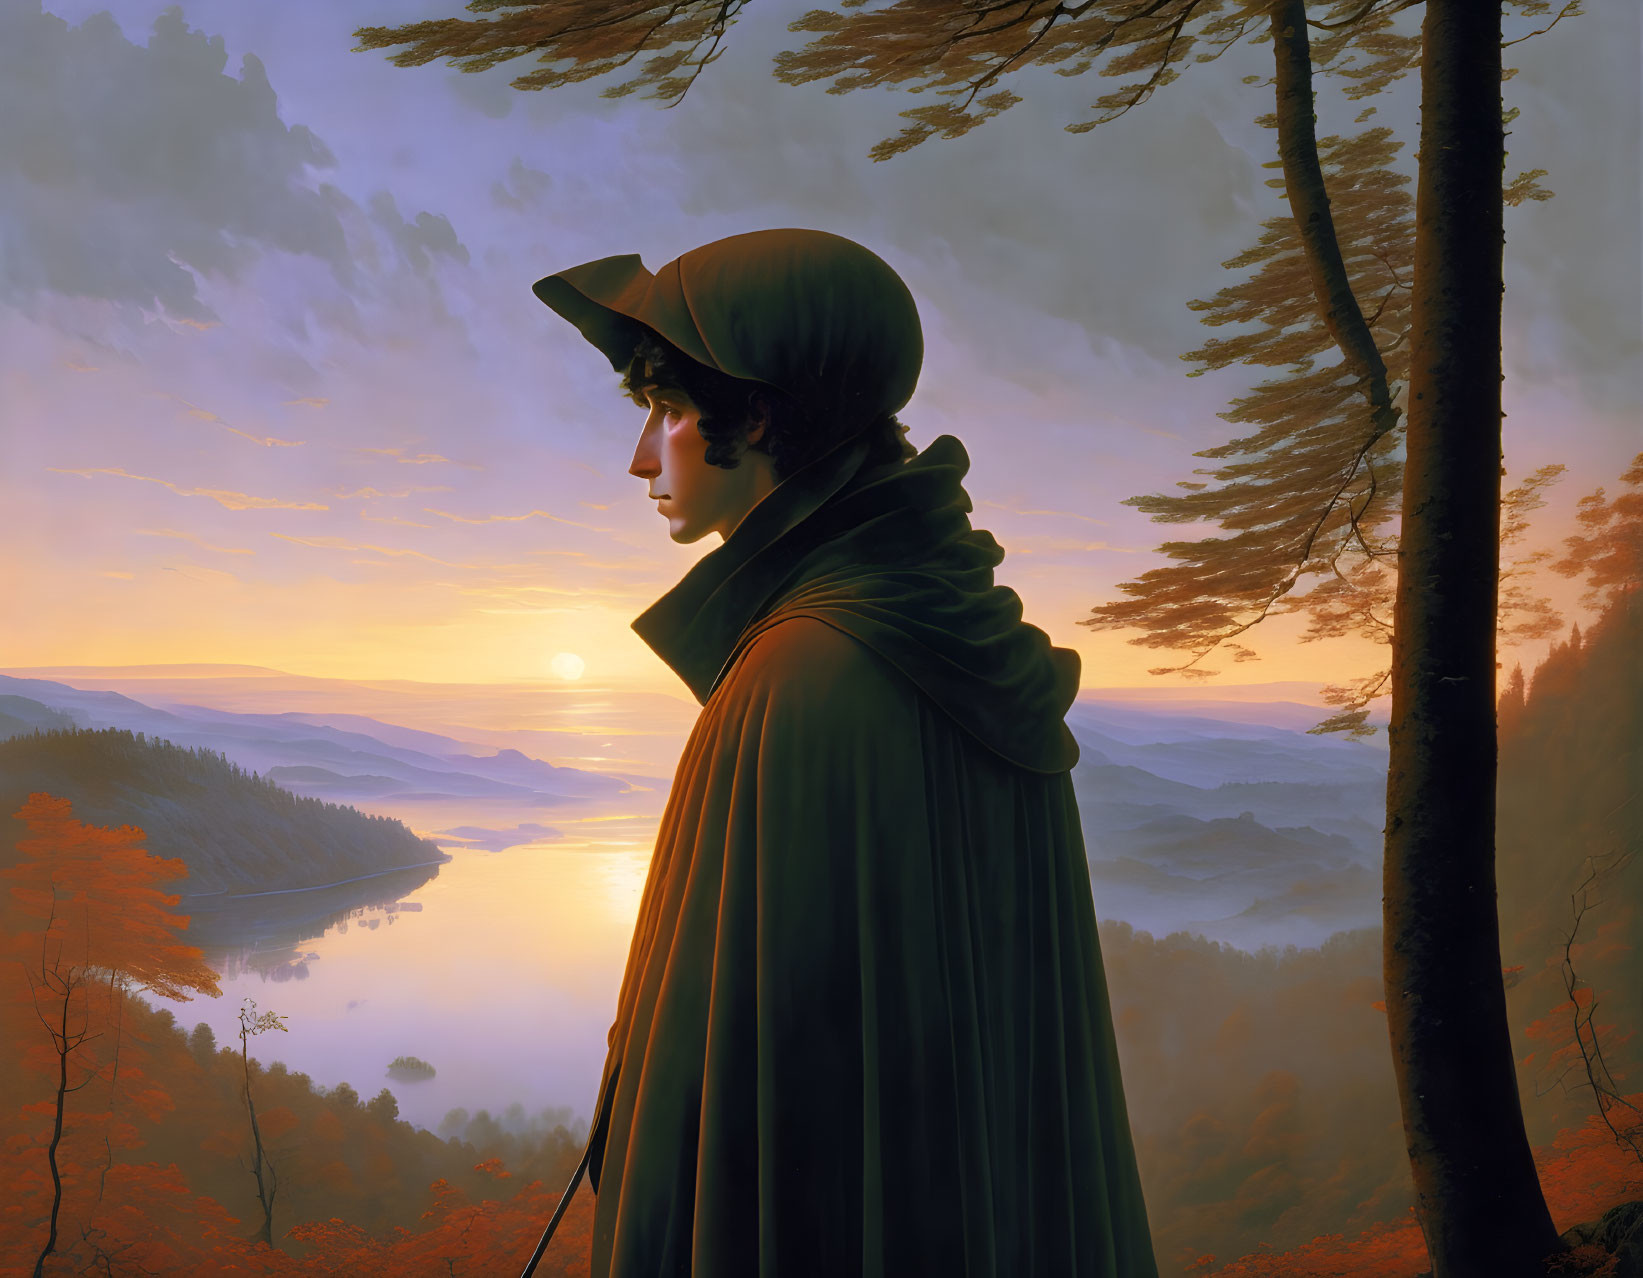 Cloaked figure in forest at sunrise overlooking tranquil valley with river